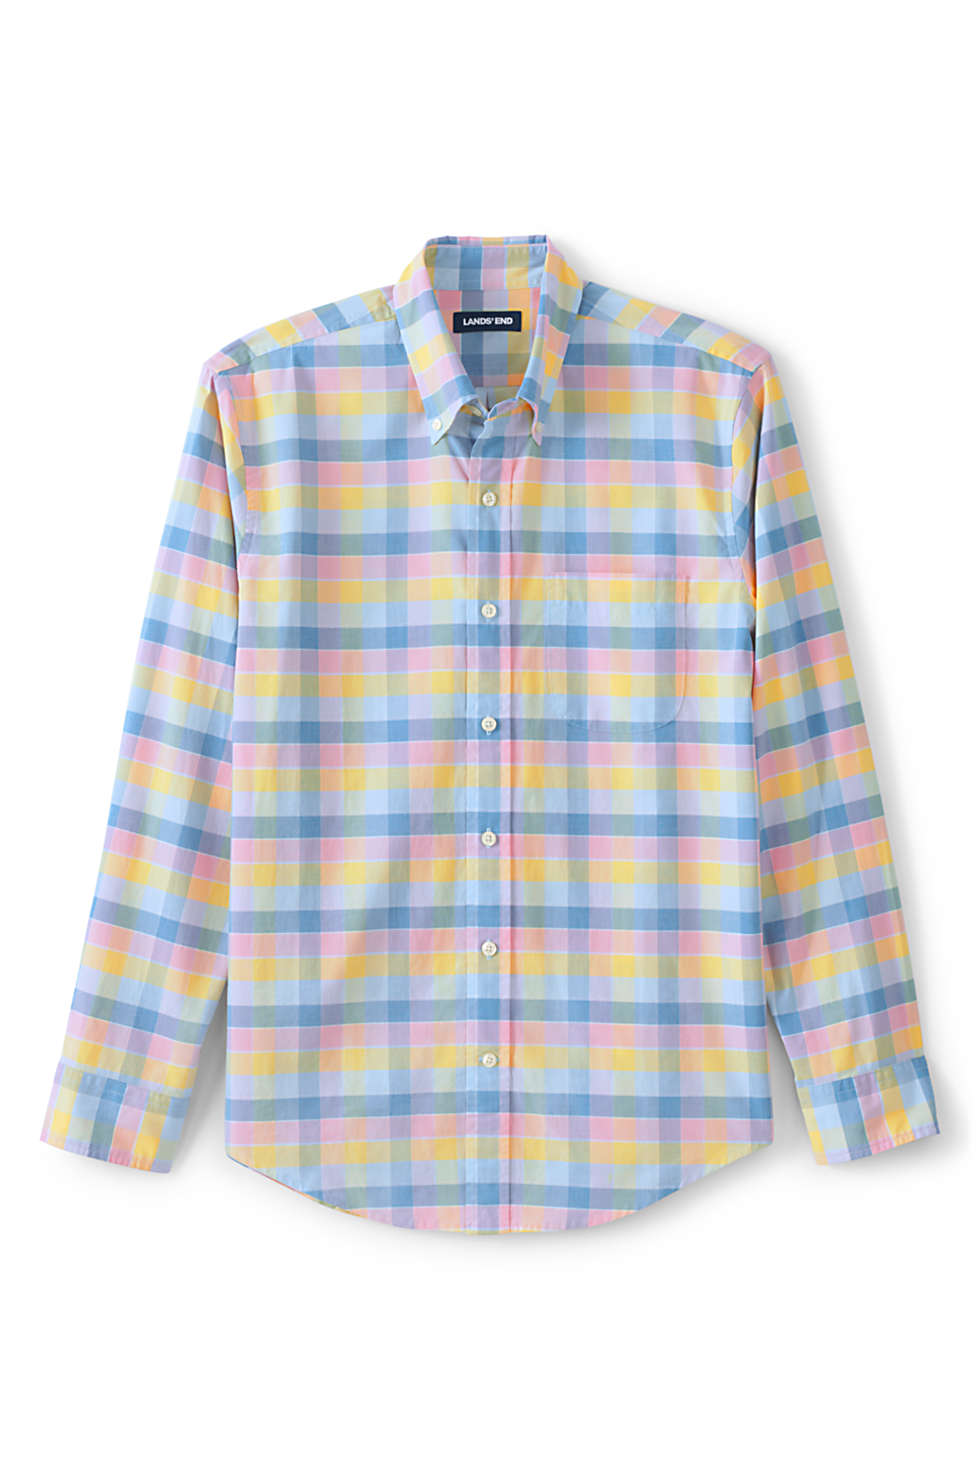 Land's End: Men's Button Down Poplin Shirts (various) From $6.78 & More + Free Shipping